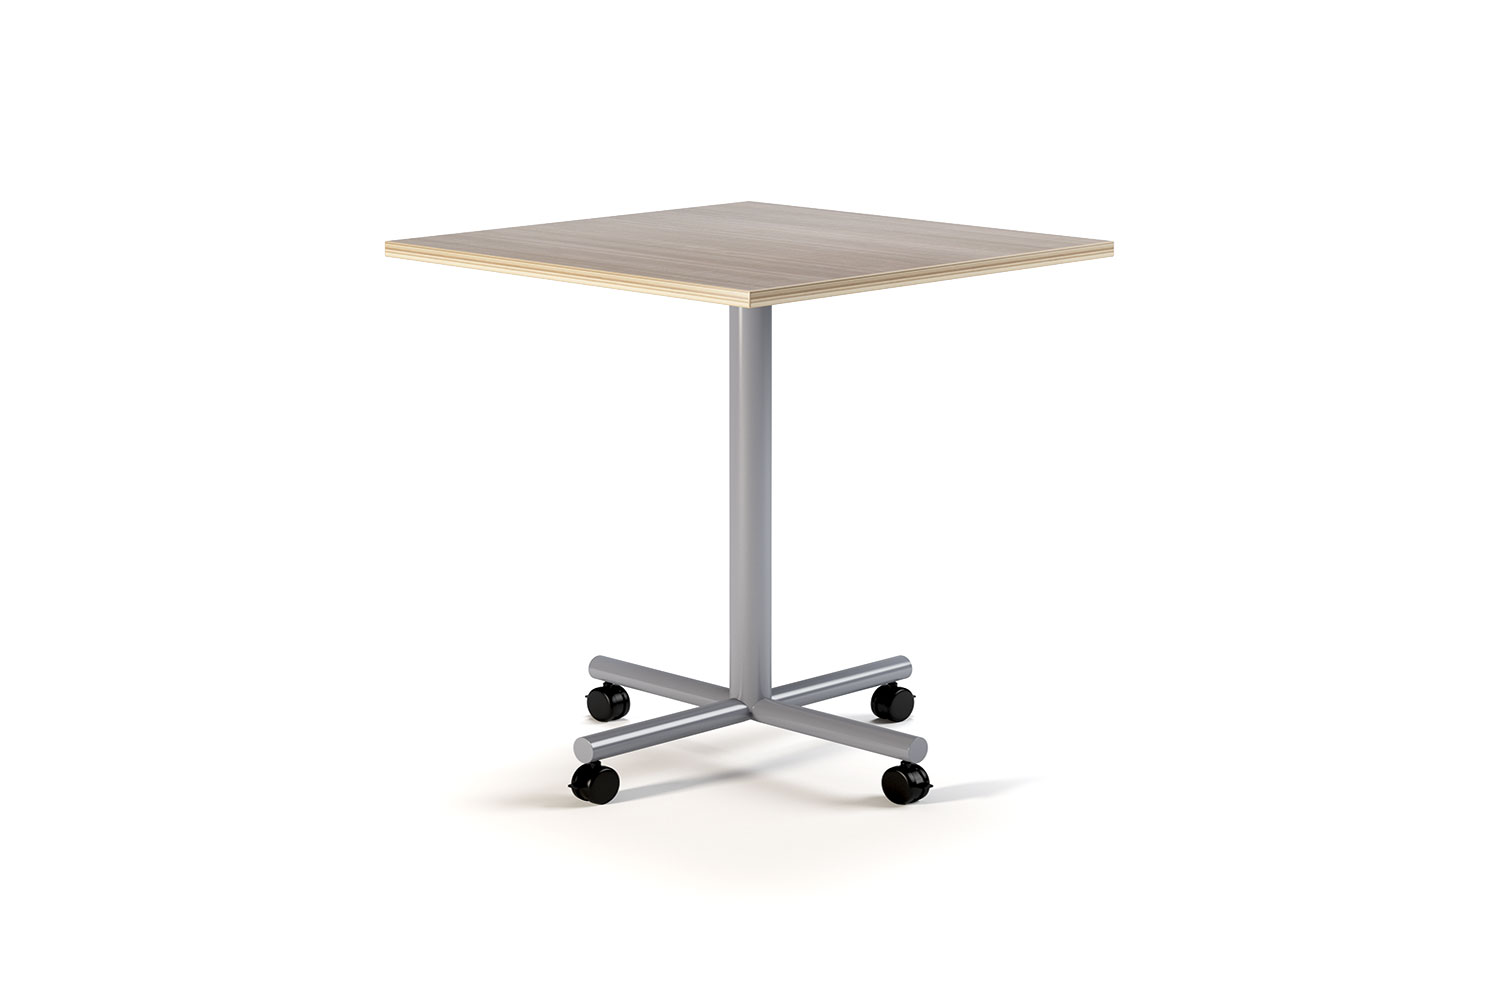 Brandon 36SQ Bar Height Table with Casters